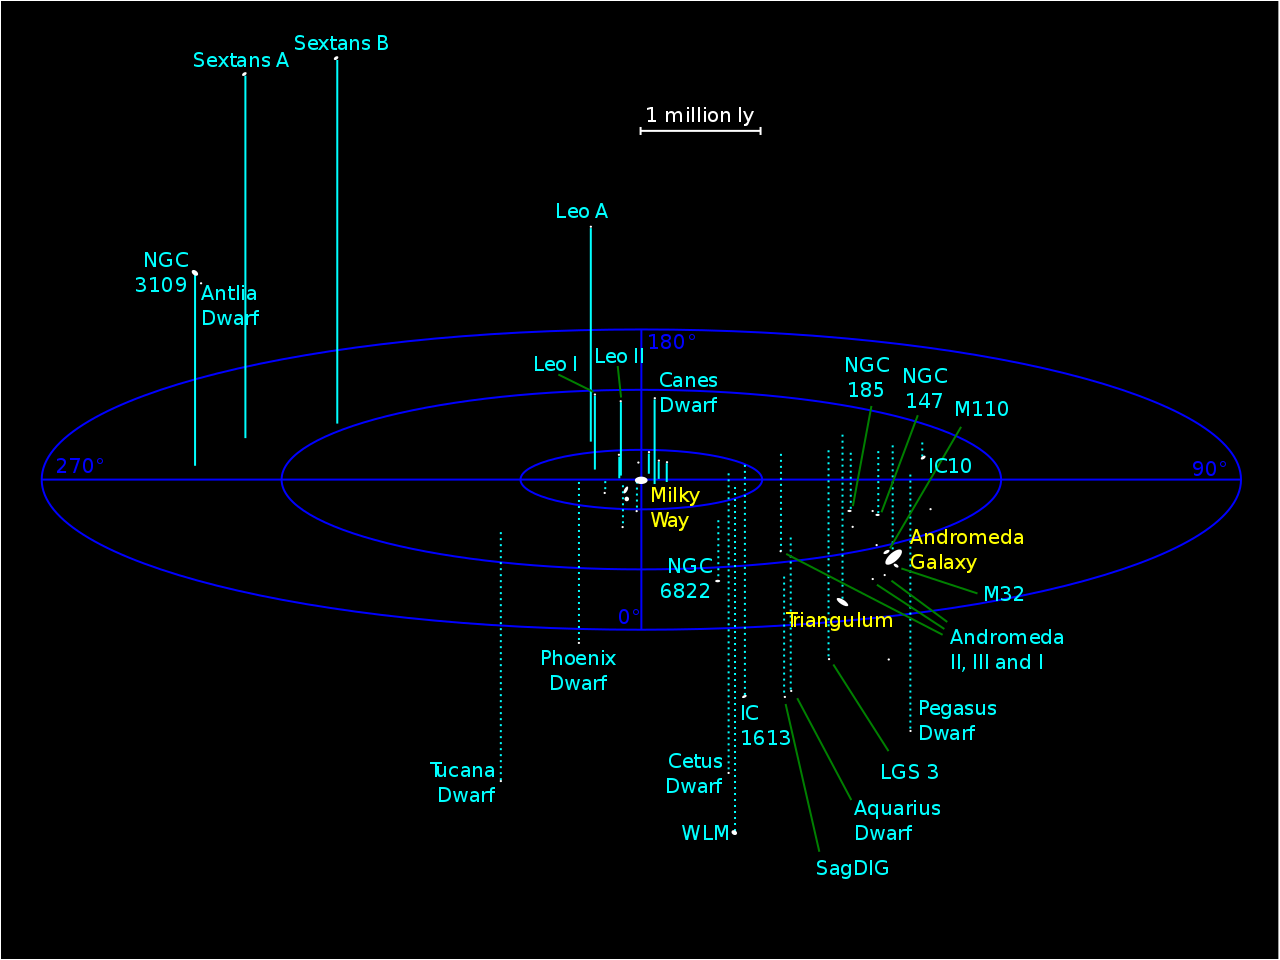 map of the local group of galaxies, with the milky way in the middle